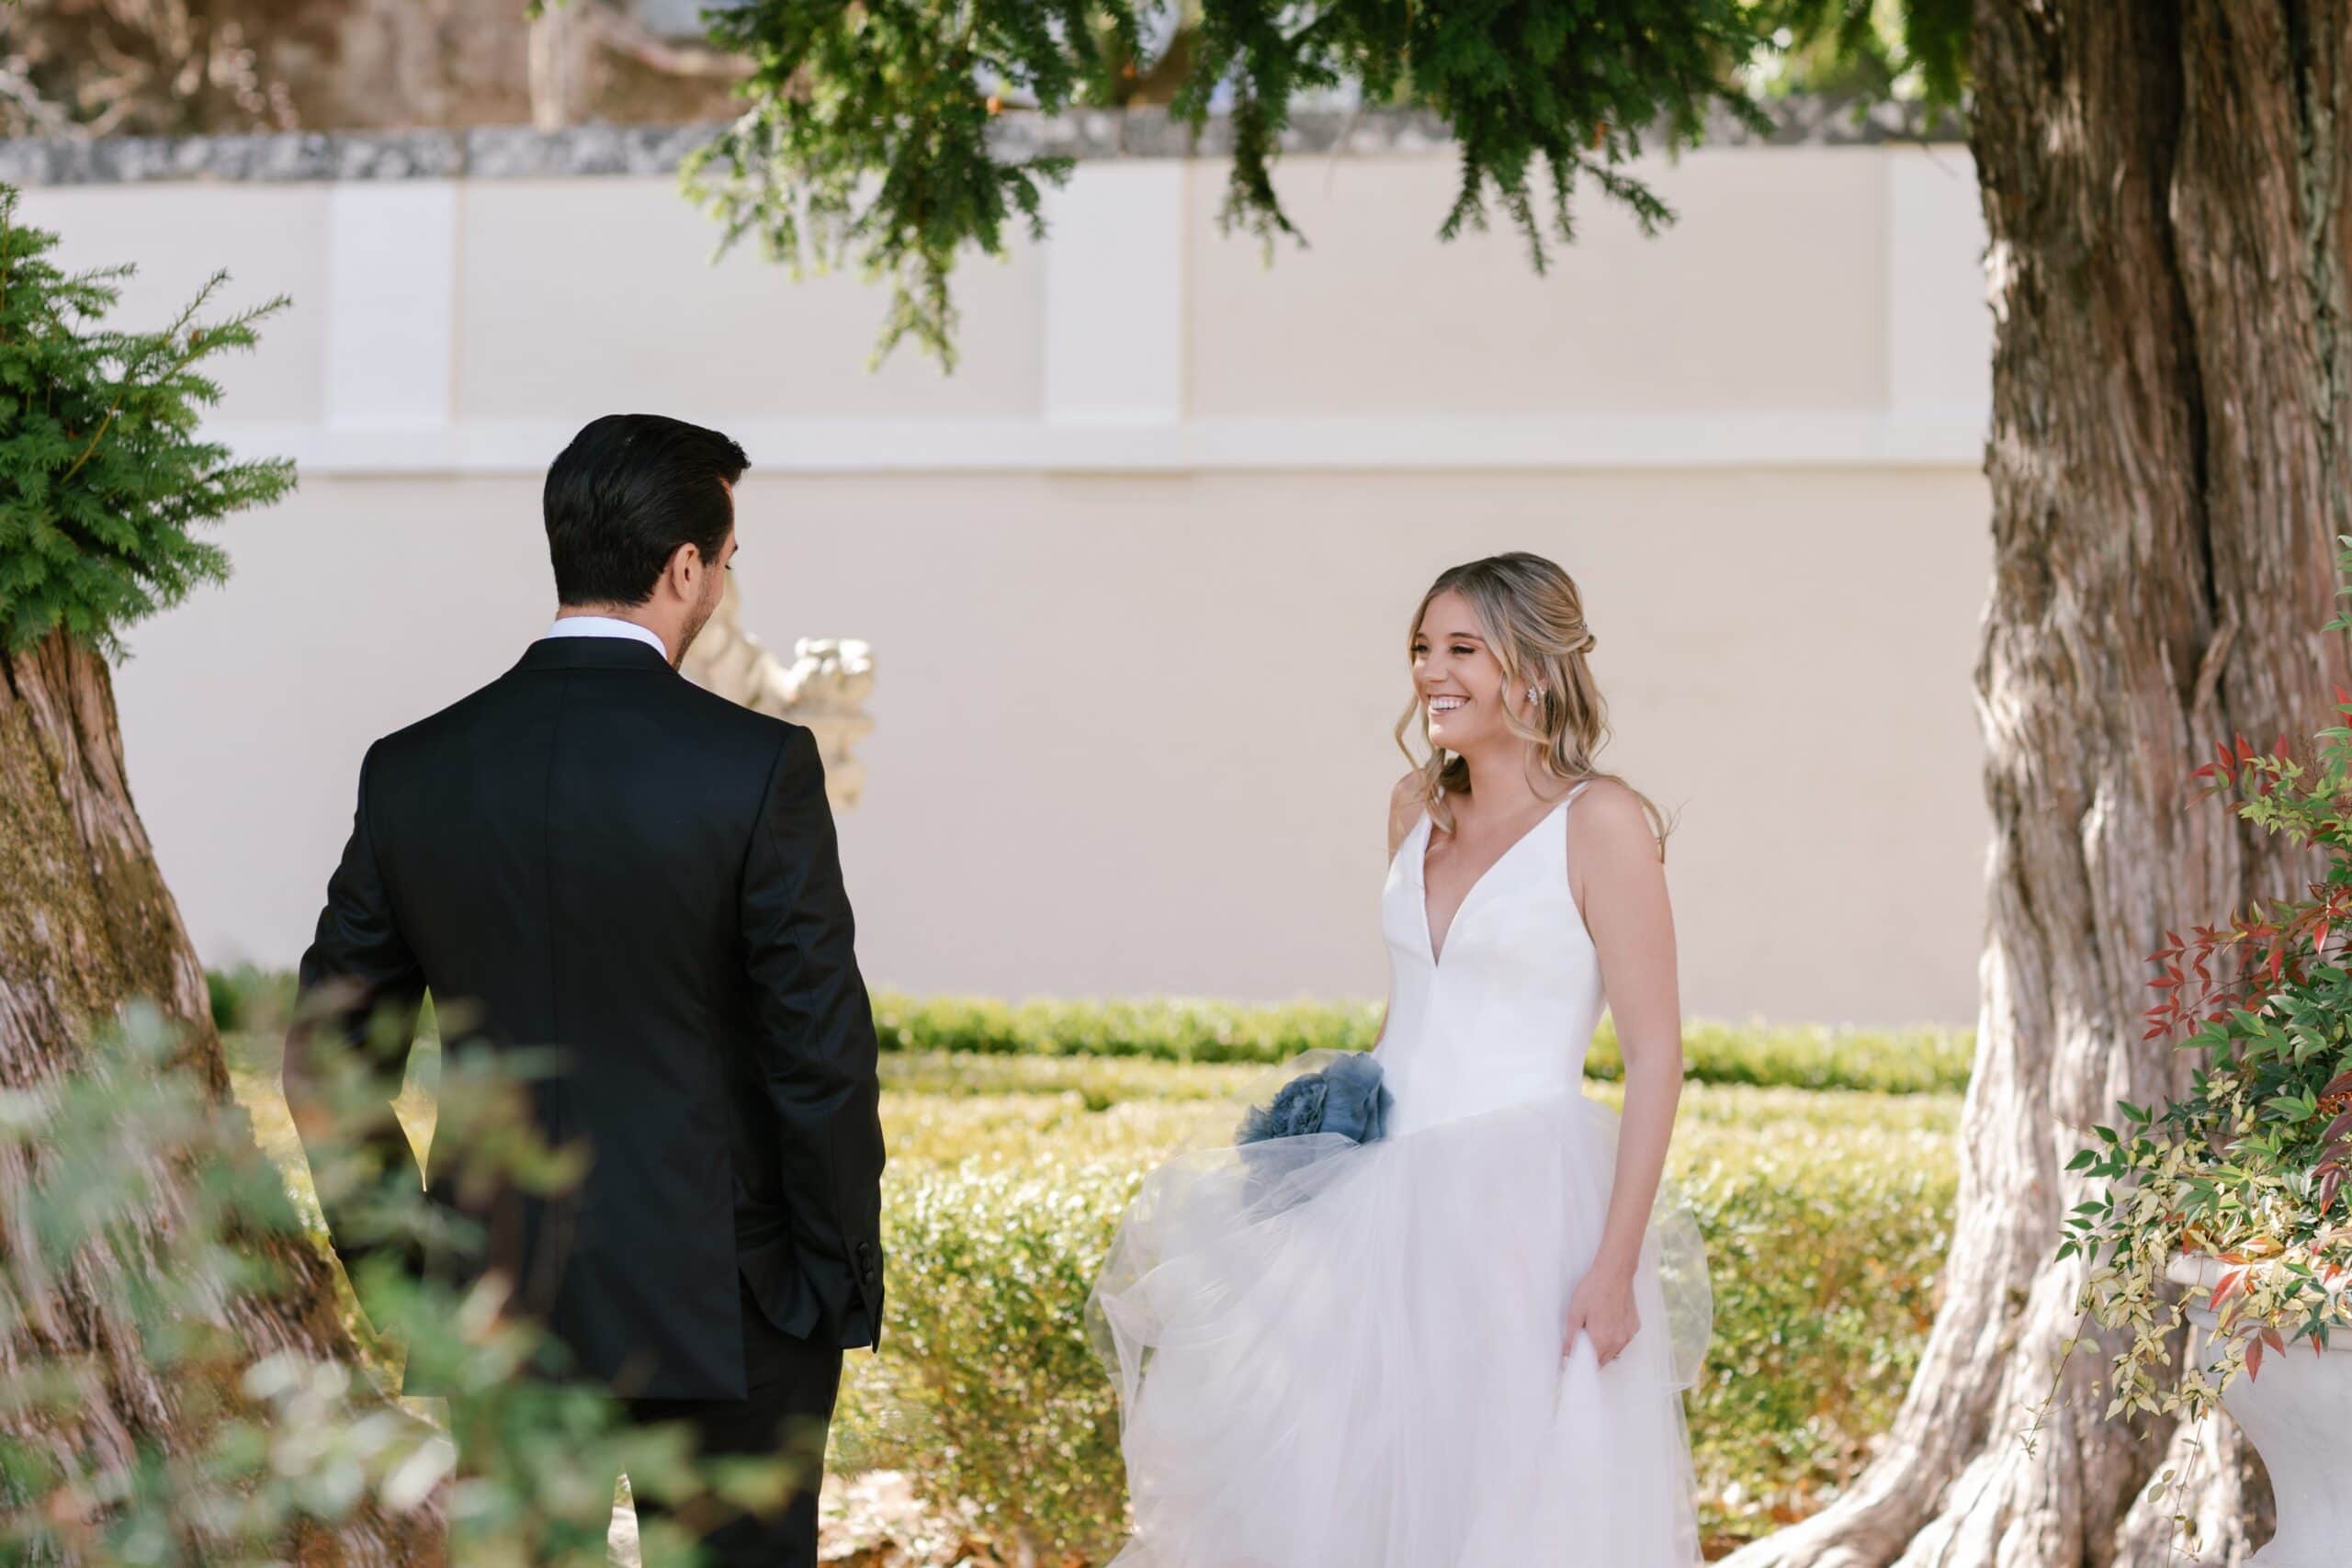 Bride joyfully approaching her groom for their First Look at Palace of Correio-Mor.